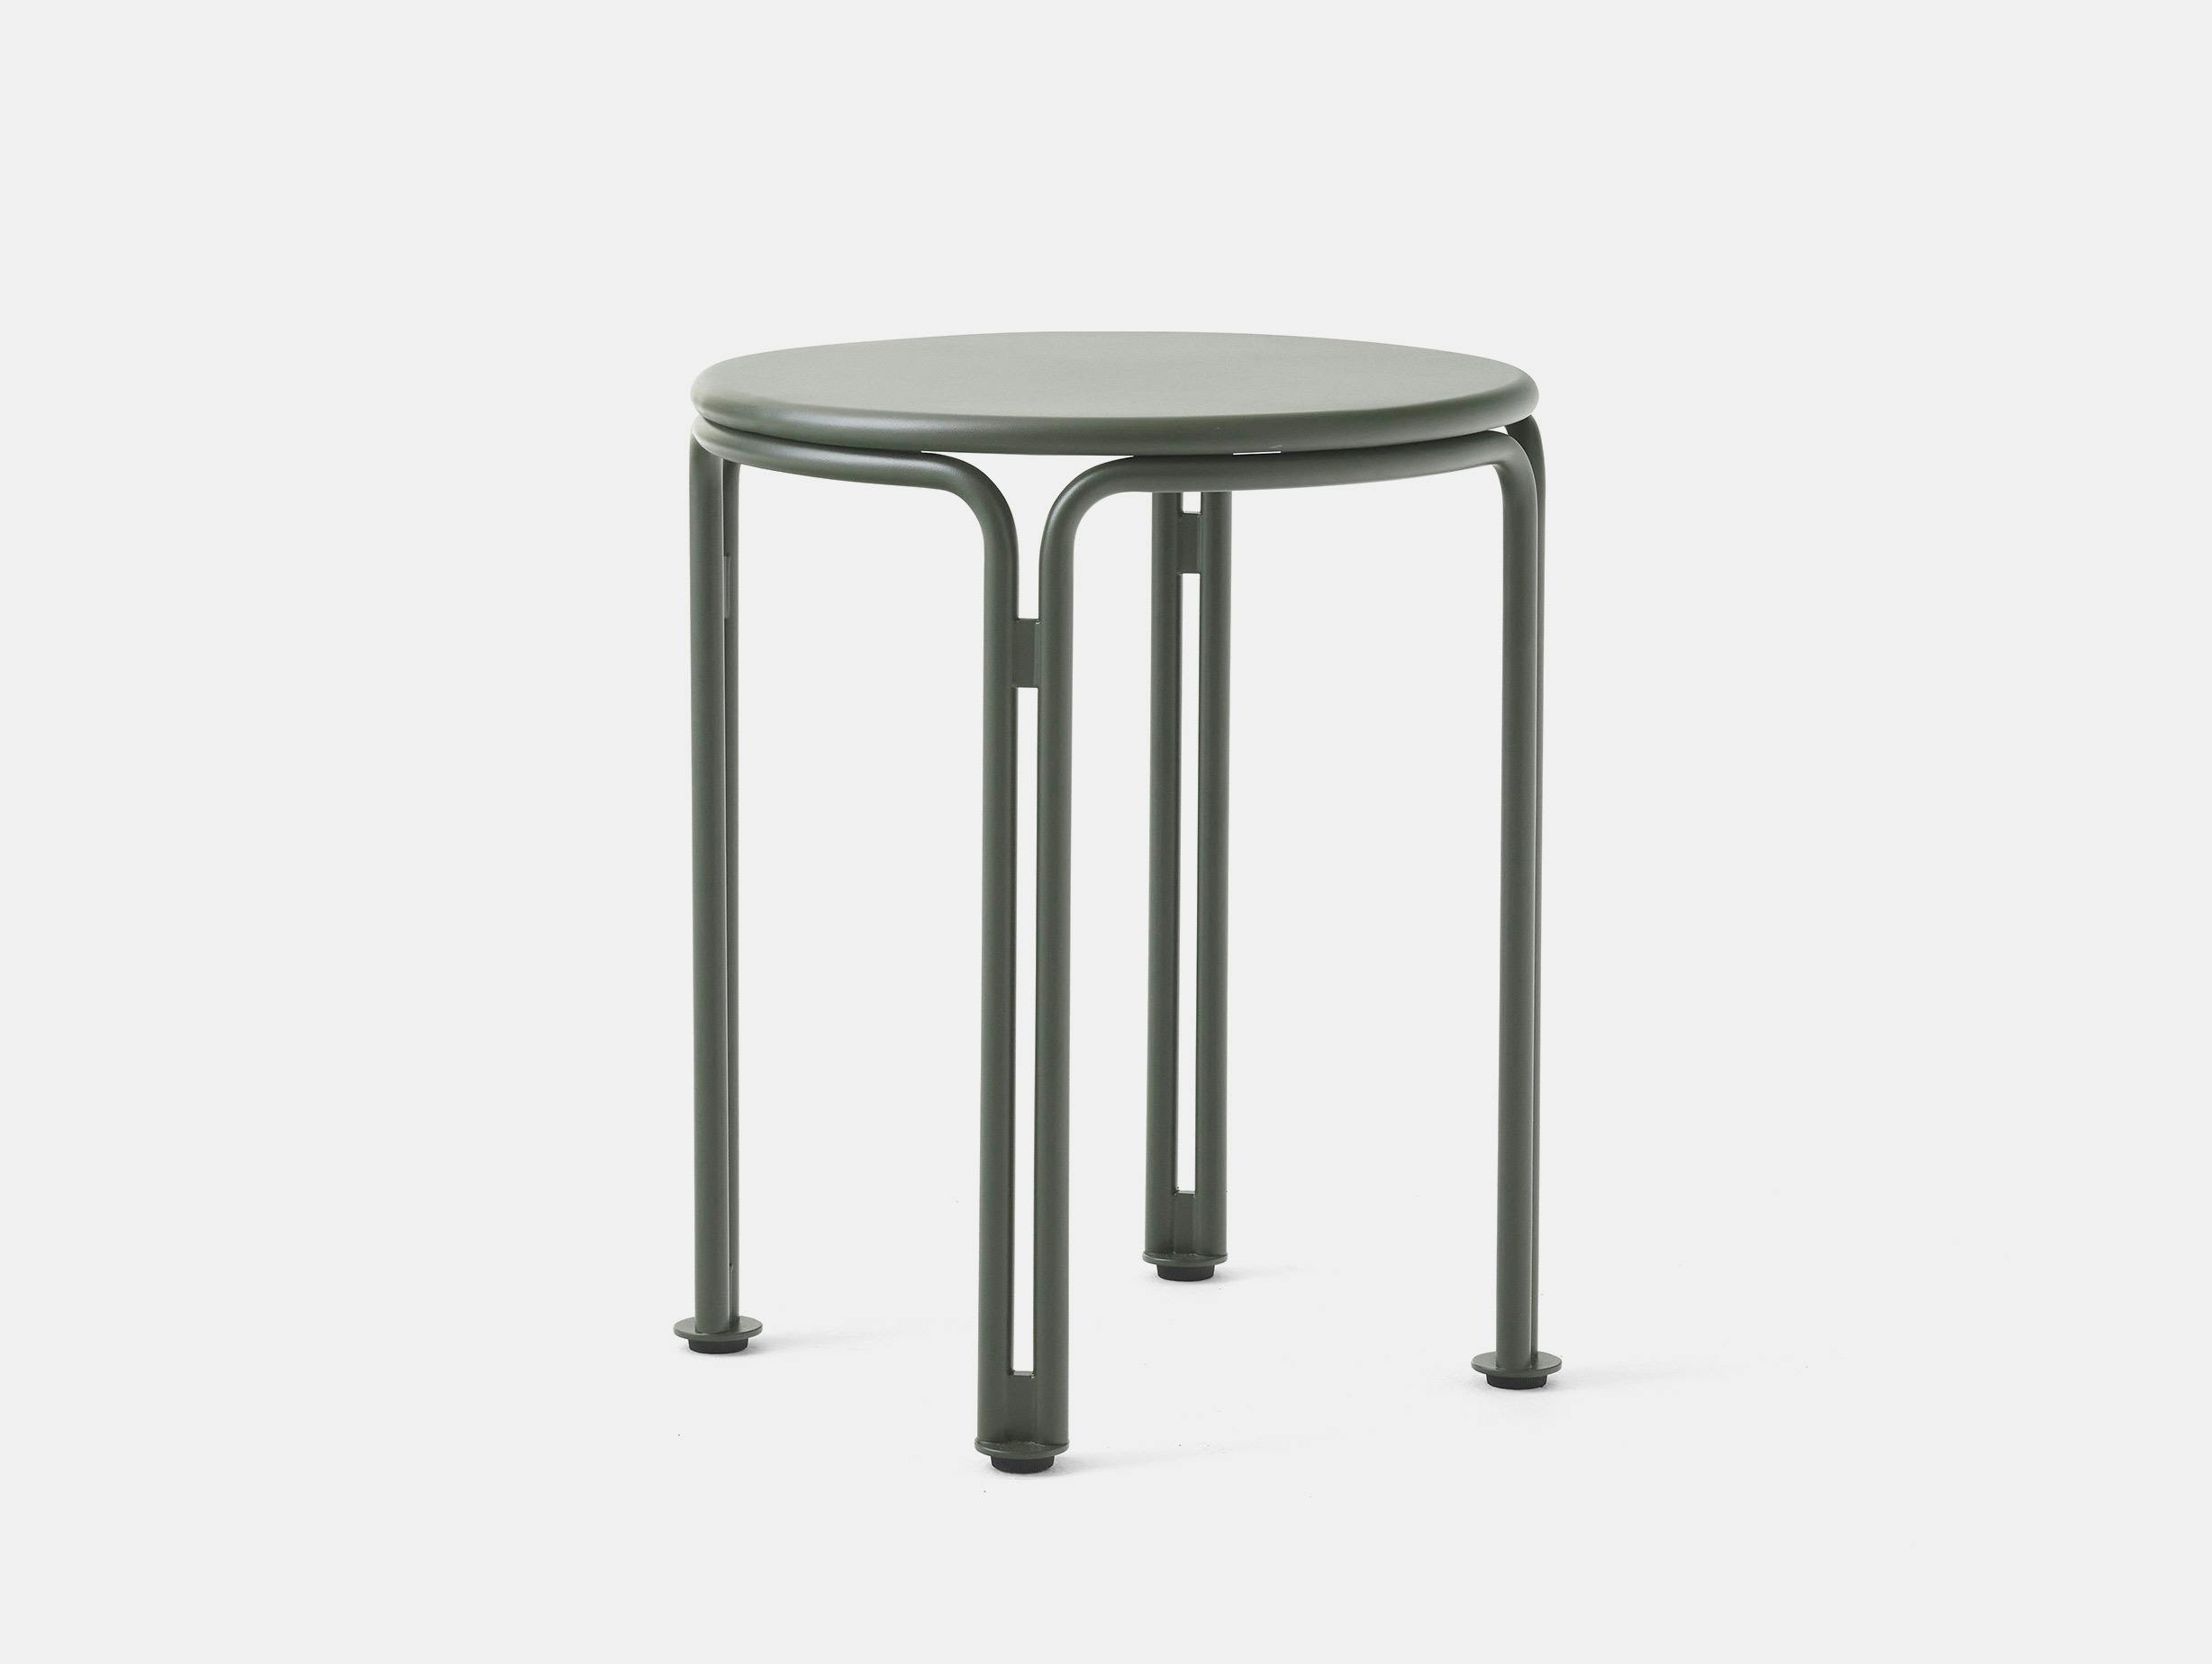 Tradition Space Copenhagen Thorvald Side Table Bronze Green